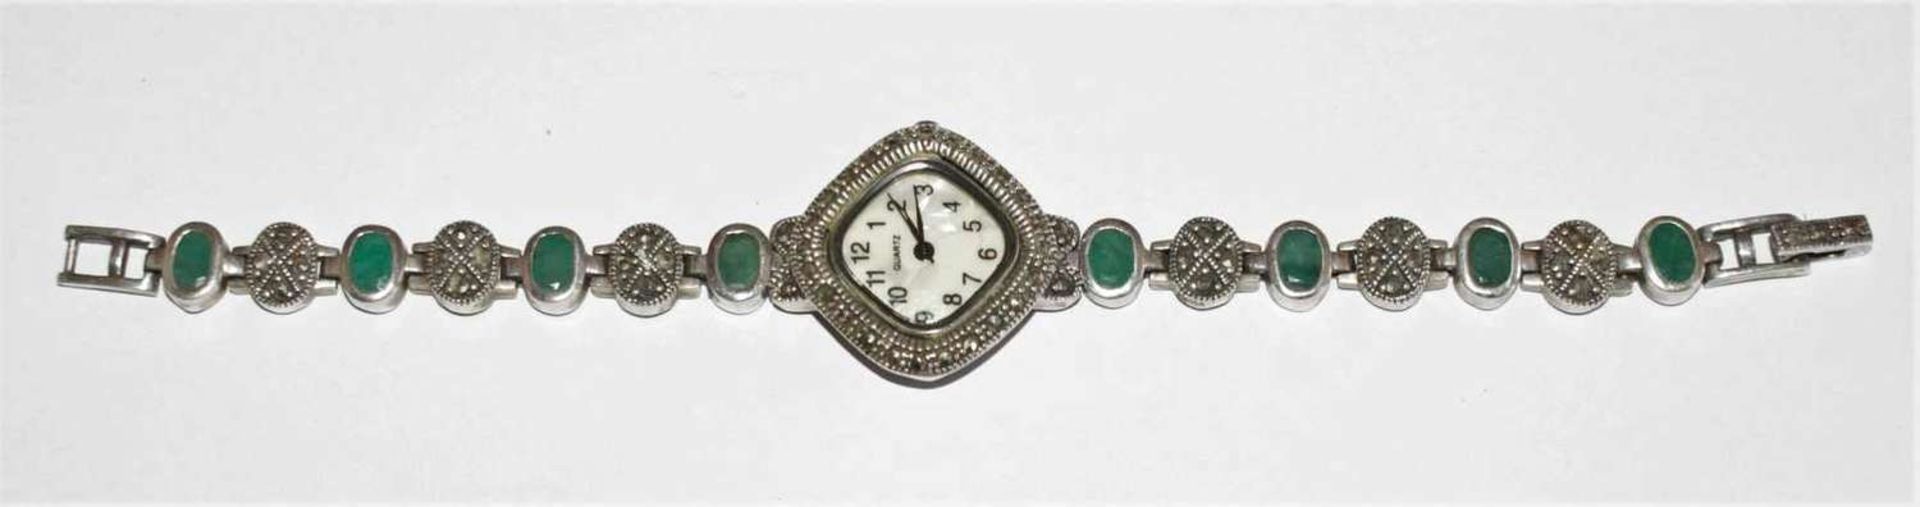 Women's wristwatch, 925 silver, set with emeralds and marcasites. Quartz. Length about 18